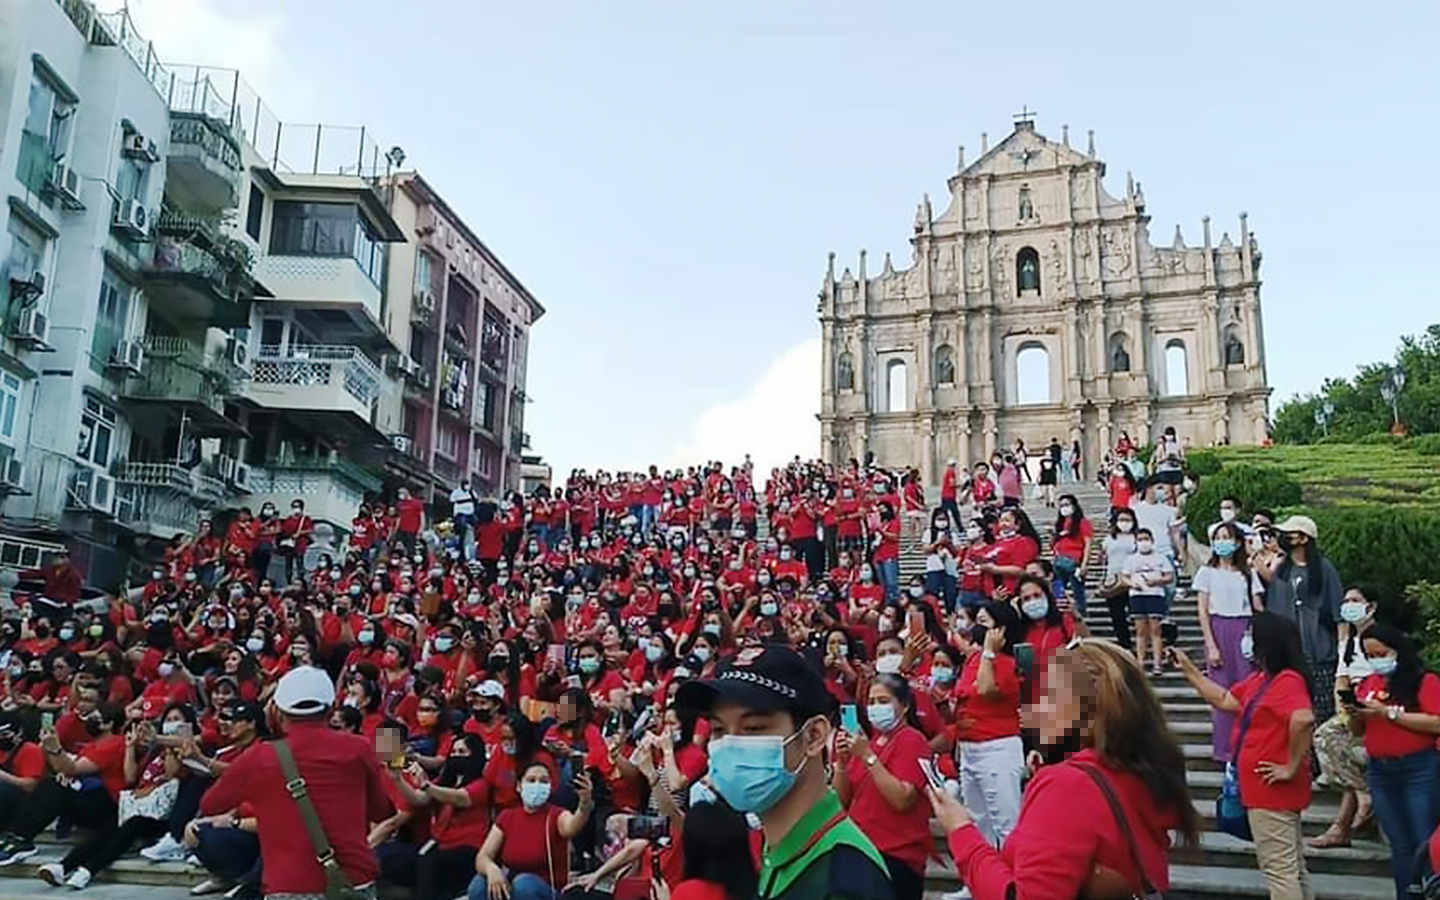 Filipinos told not to rally in public in Macao